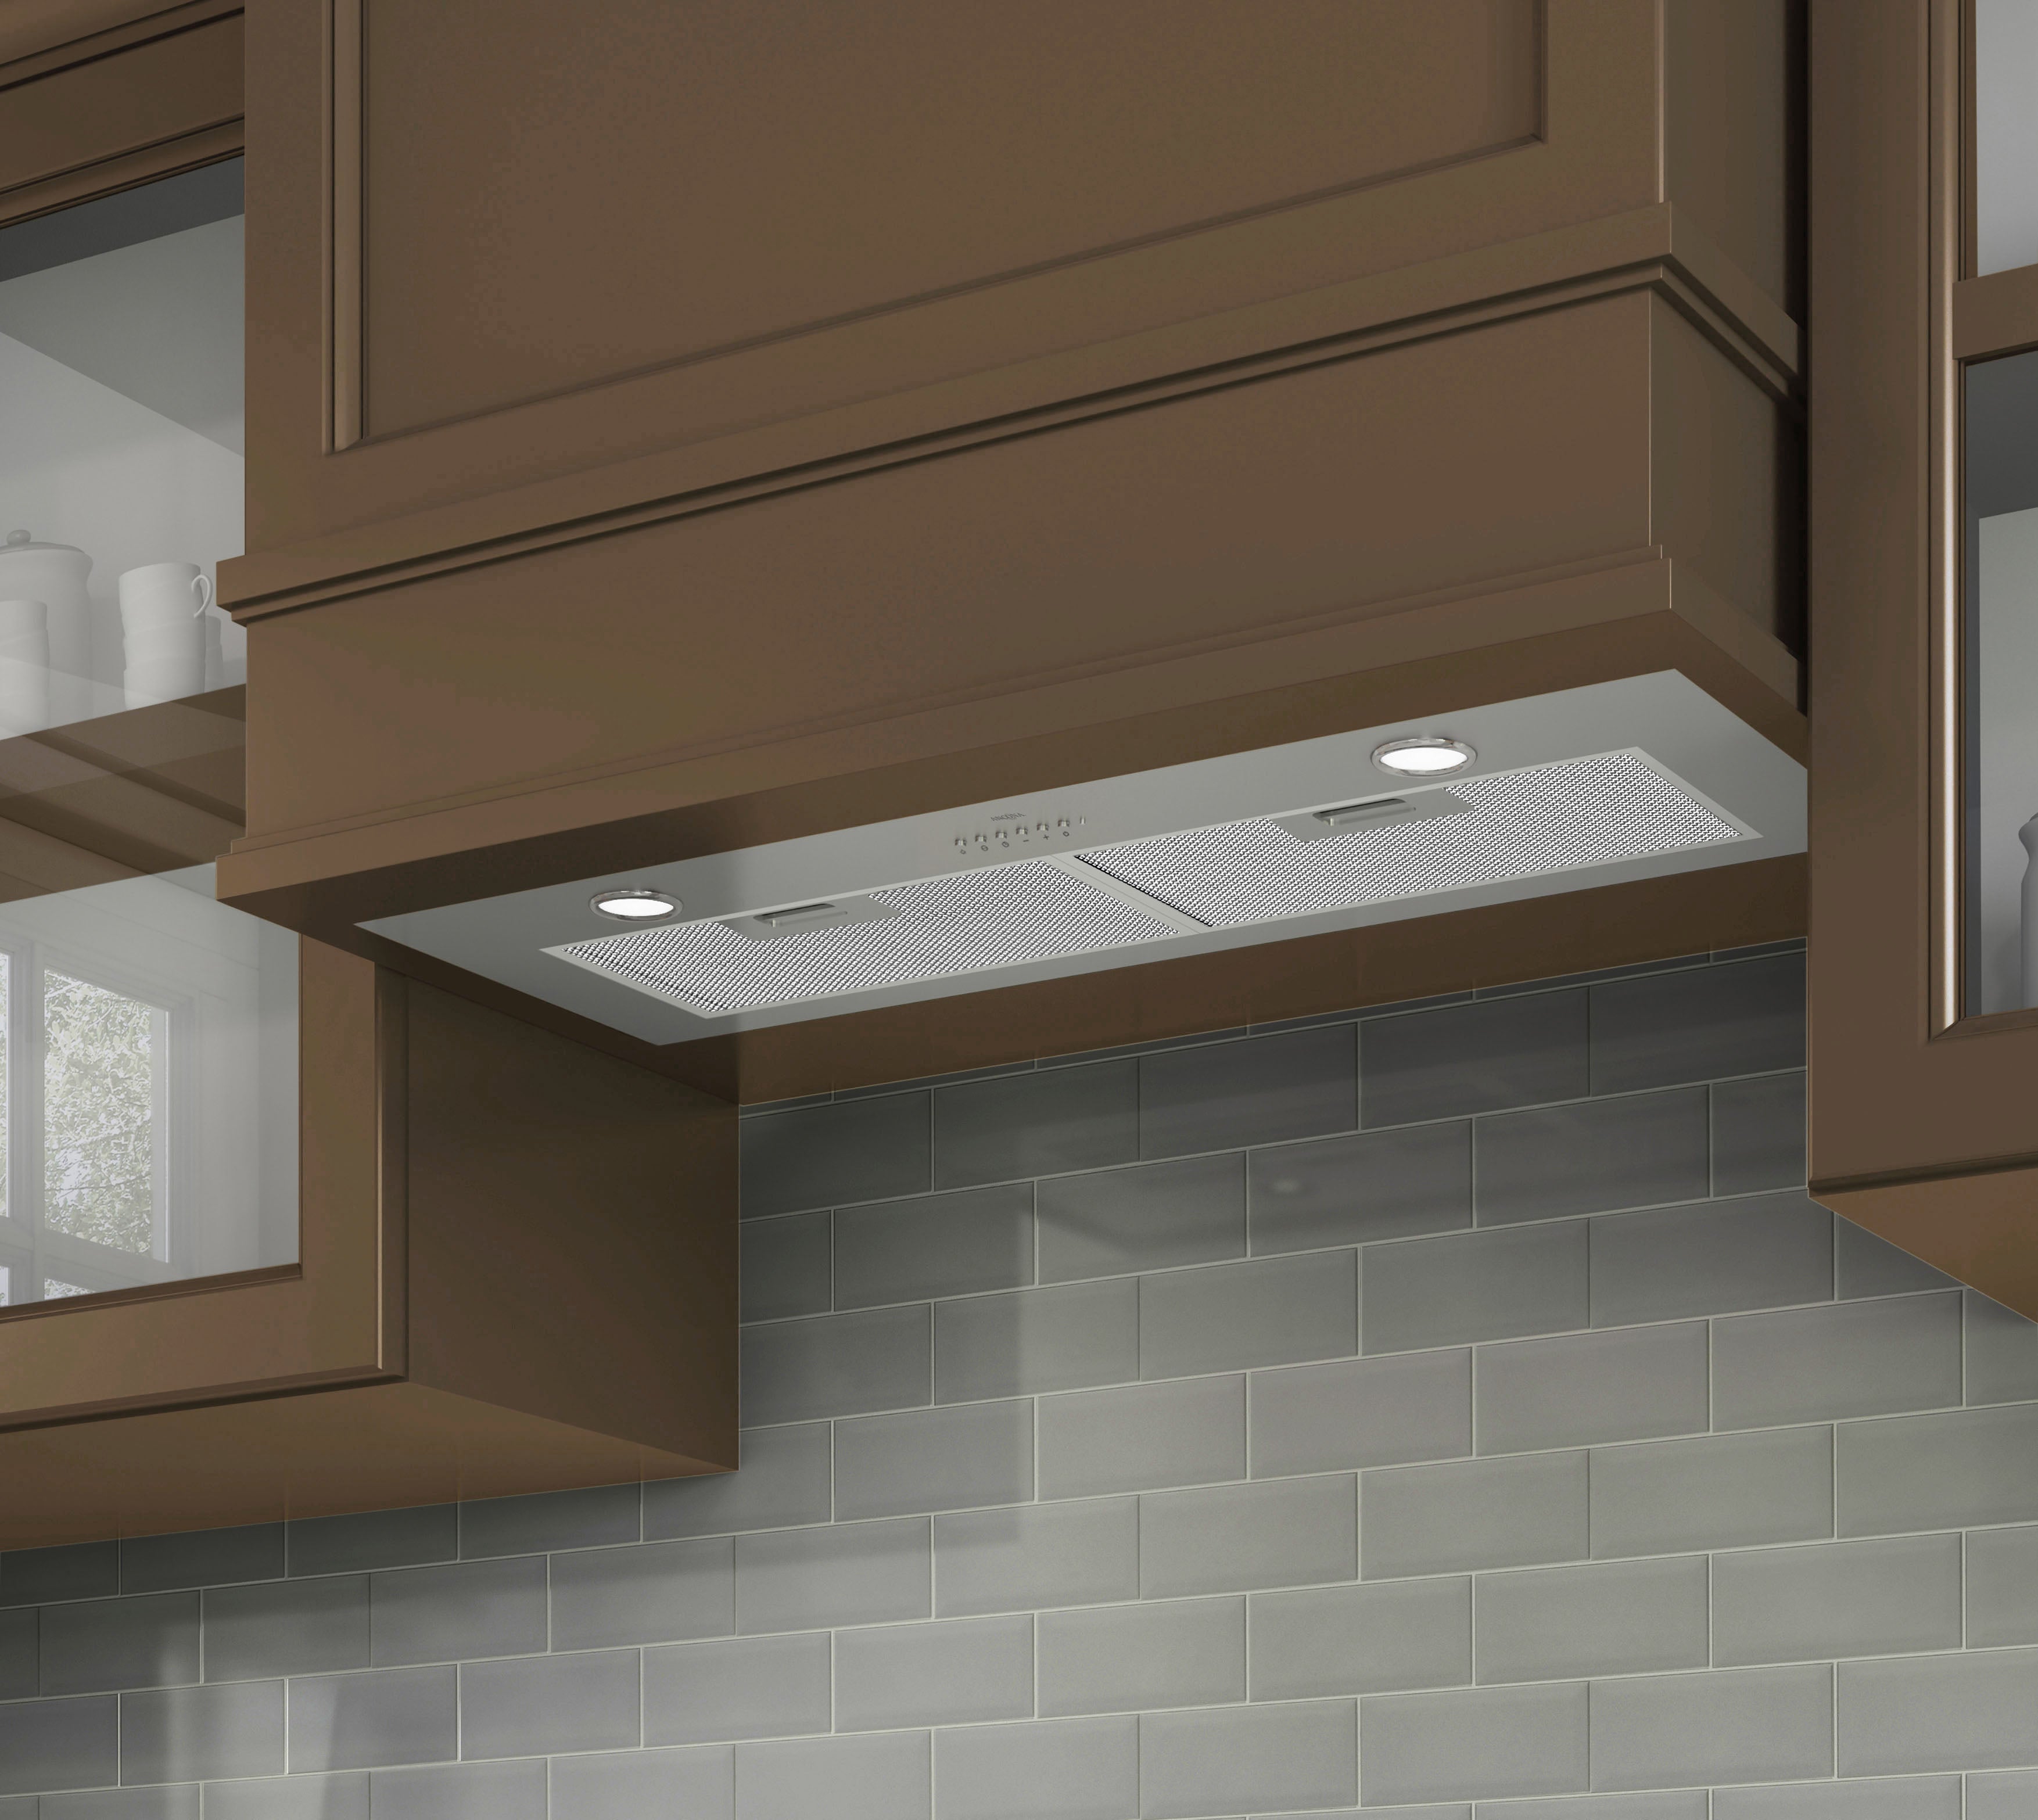 28 in. Ducted Stainless Steel Undercabinet Range Hood Insert with Night Light Feature